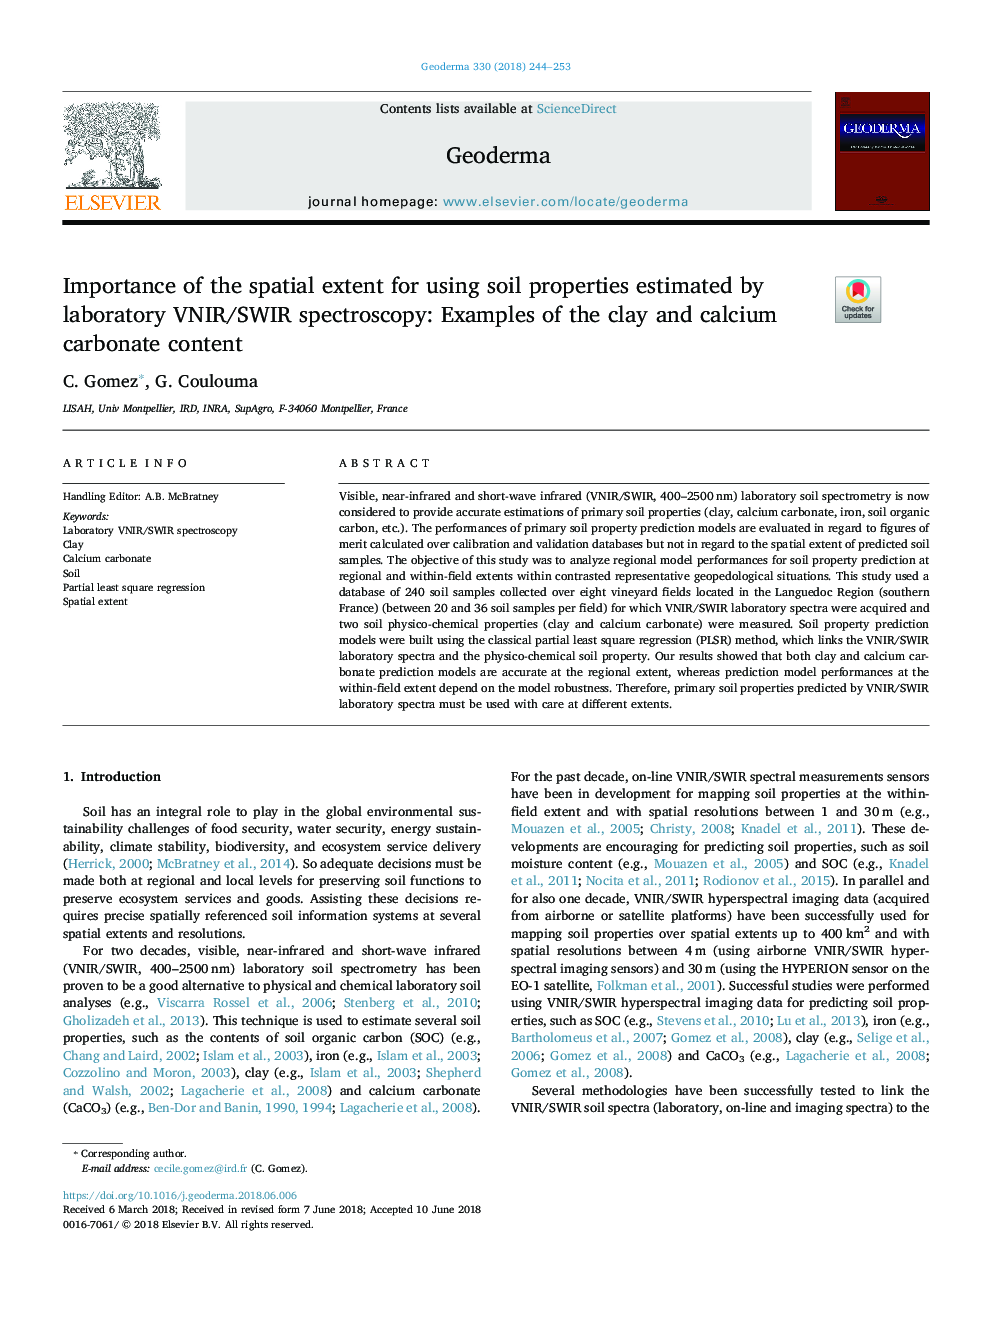 Importance of the spatial extent for using soil properties estimated by laboratory VNIR/SWIR spectroscopy: Examples of the clay and calcium carbonate content